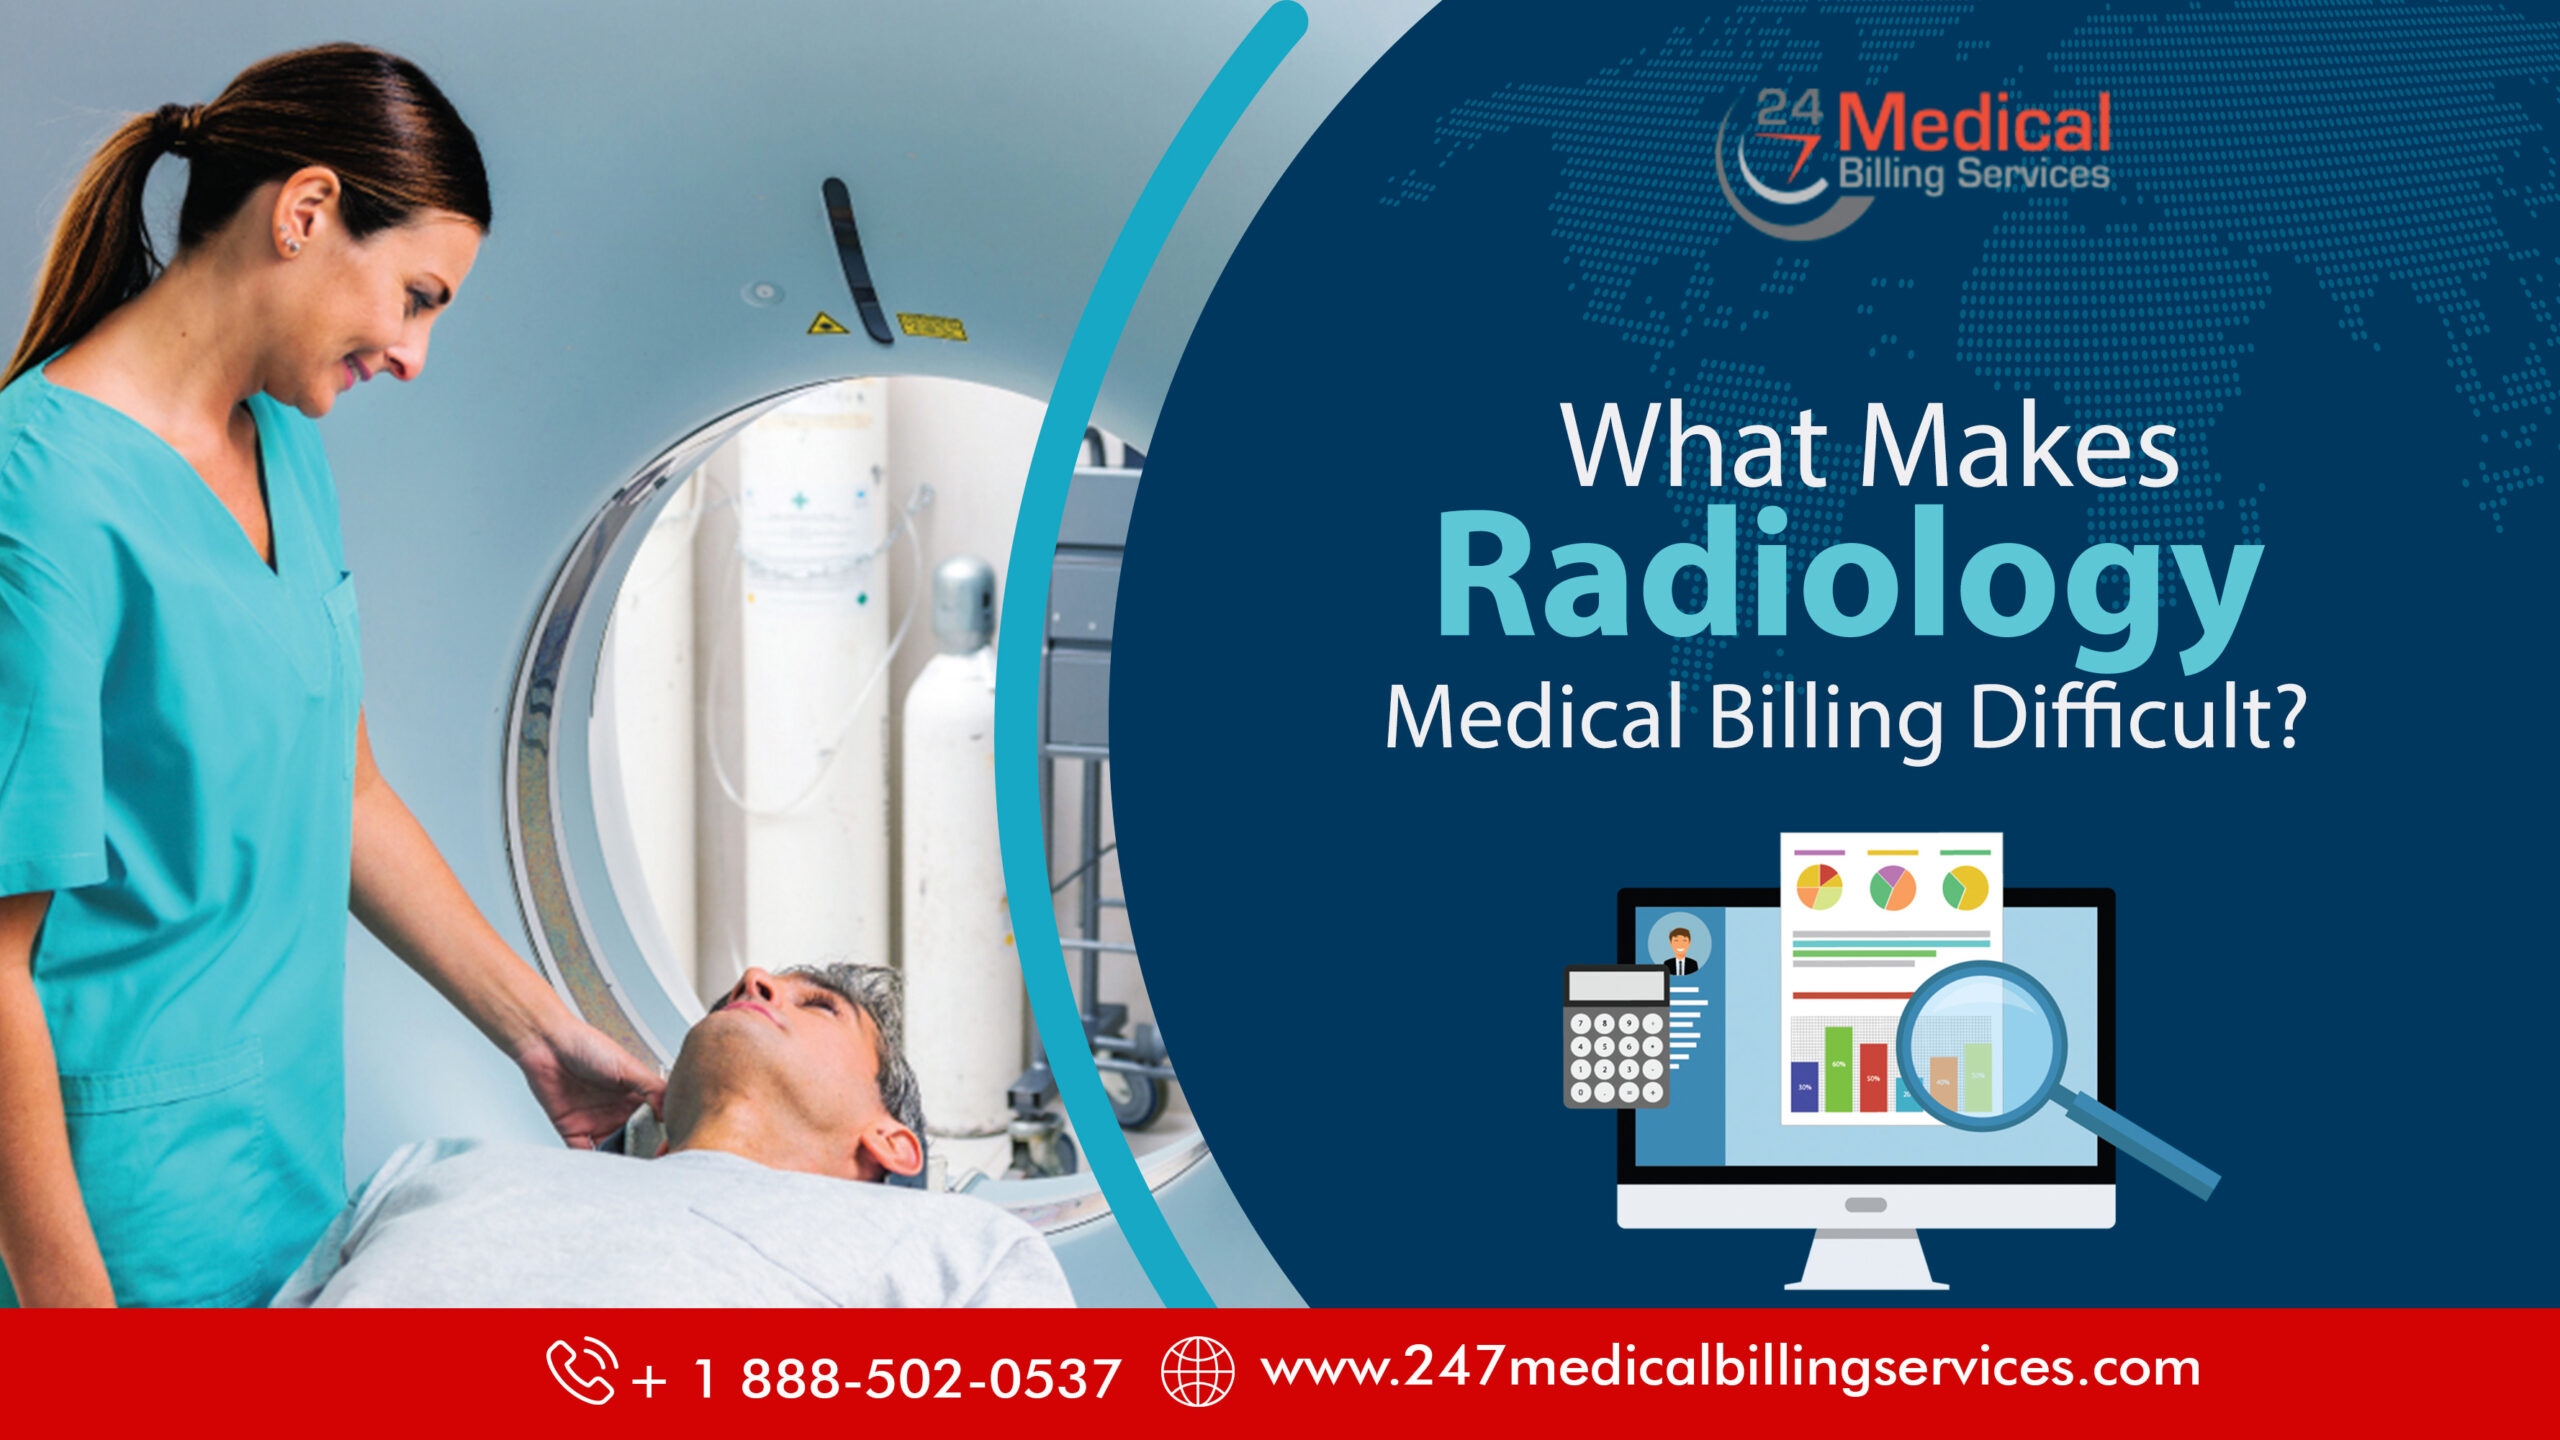  What Makes Radiology Medical Billing Difficult?